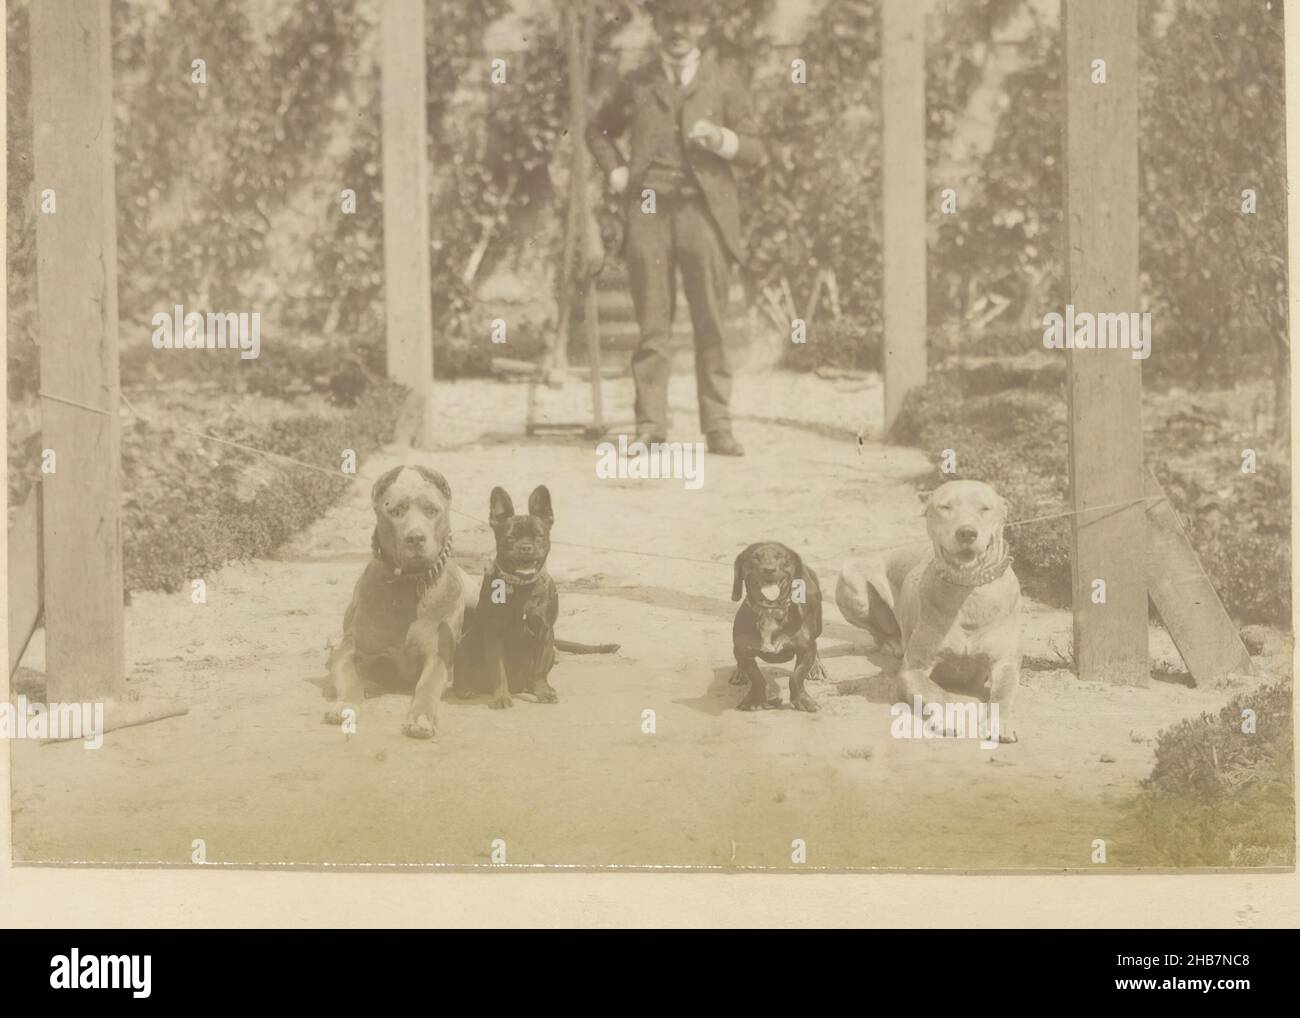 Four dogs and a man on a garden path in France, Part of Photo album of a French amateur photographer with shots of a family, distillery Delizy &amp; Doistau Fils, the army and places of interest in France., anonymous, France, c. 1900 - c. 1910, paper, albumen print, height 77 mm × width 113 mm Stock Photo